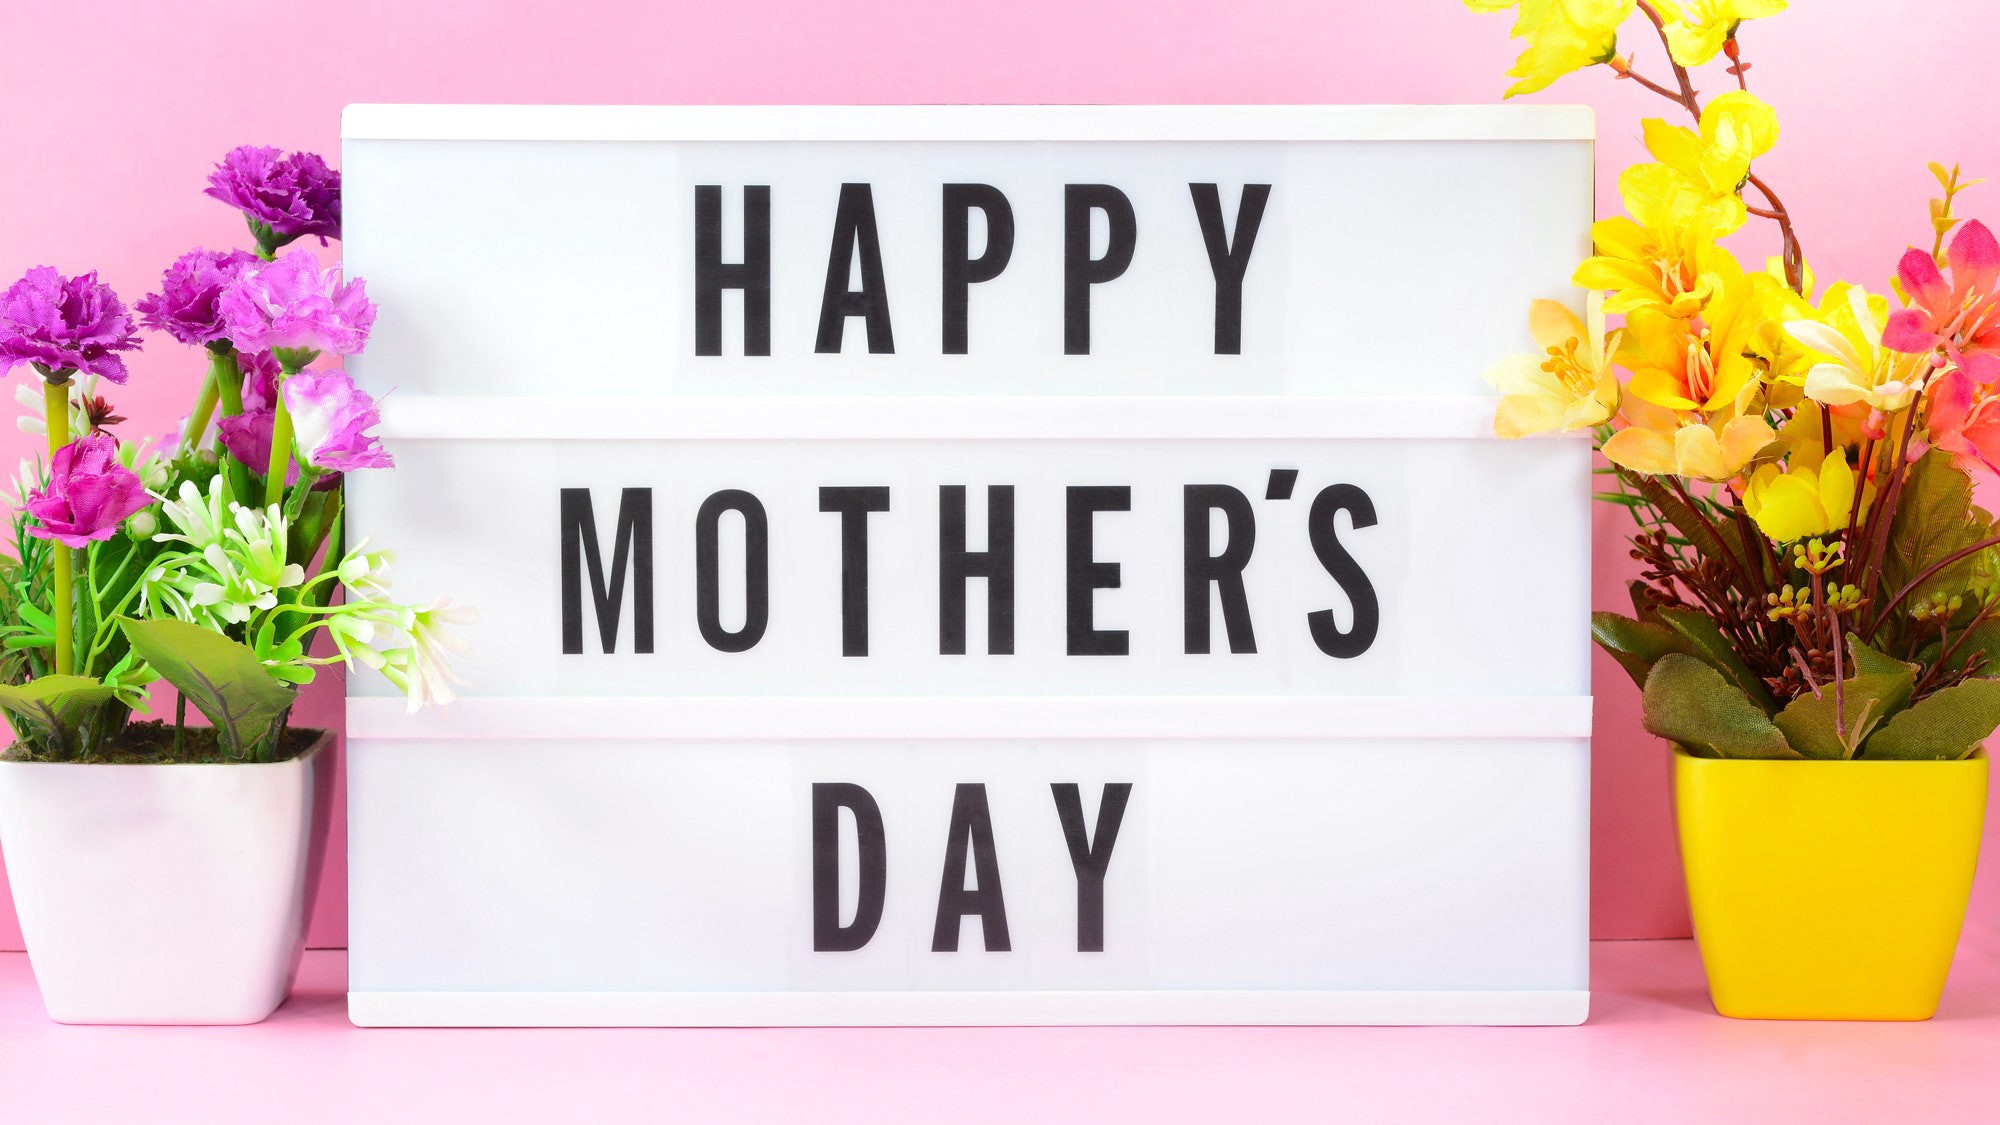 What is the best gift for Mother’s Day?